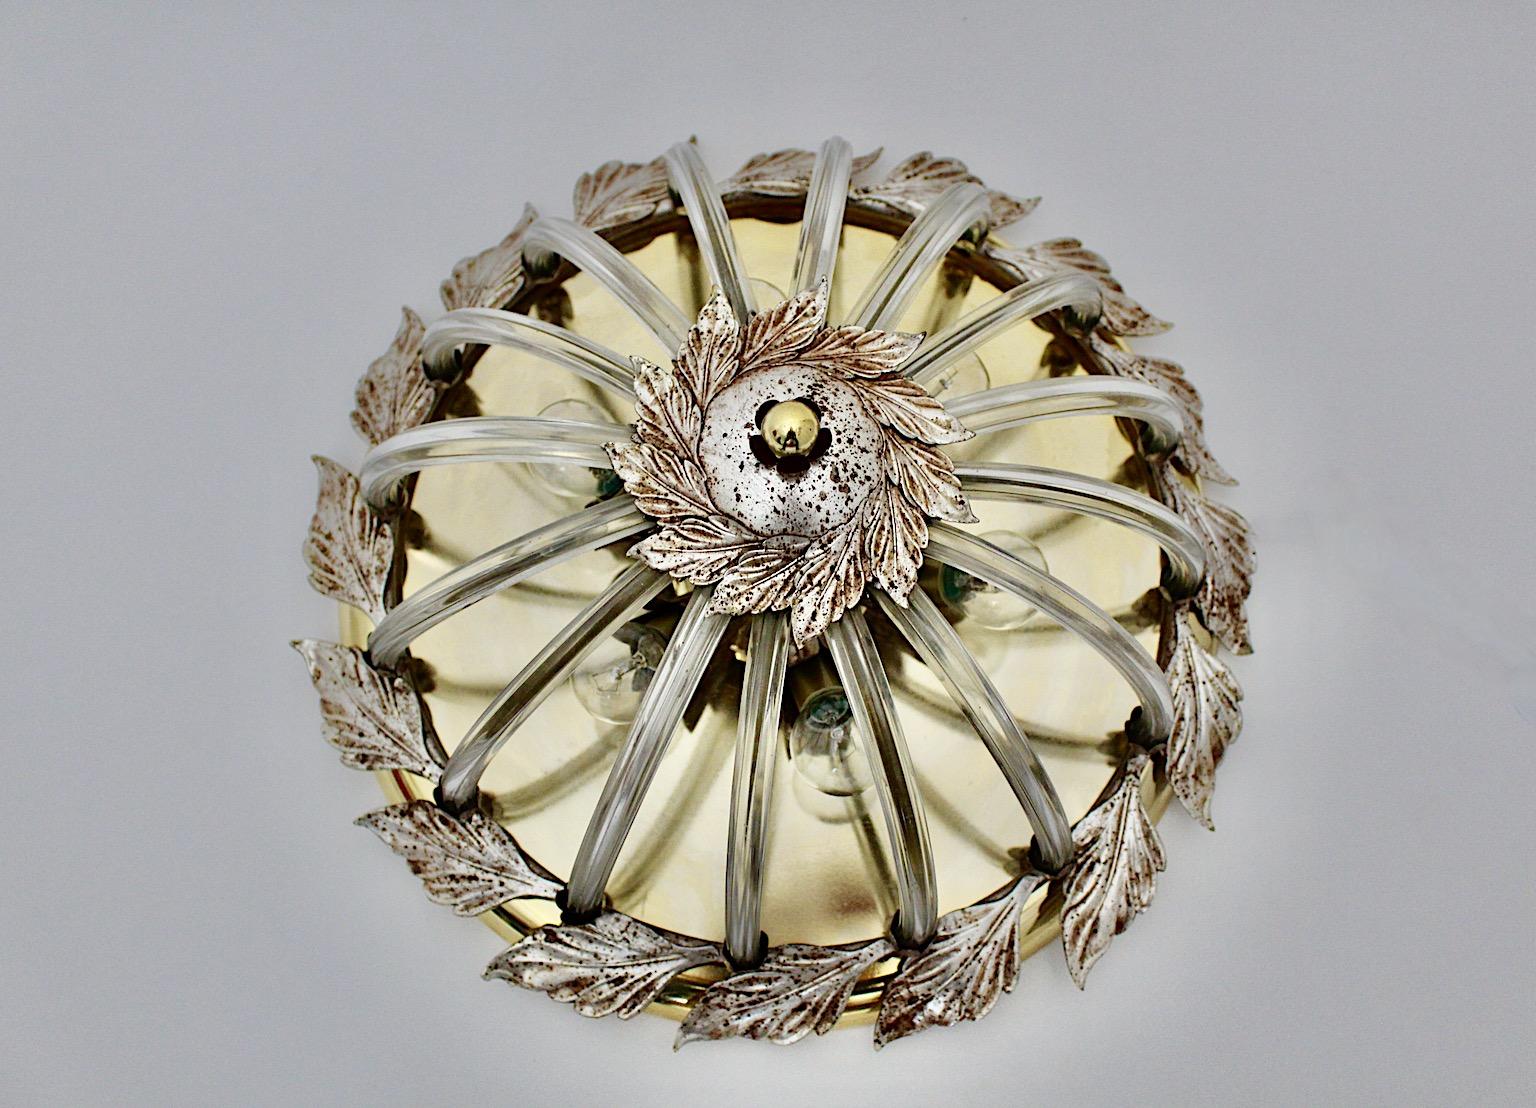 Modern vintage flush mount from silver, brass and glass round shape 1970s Italy.
The beautiful lighting or flush mount from silver plated and brass plated metal shows leaves as decor as well as 16 slightly curved clear glass rods.
It looks like